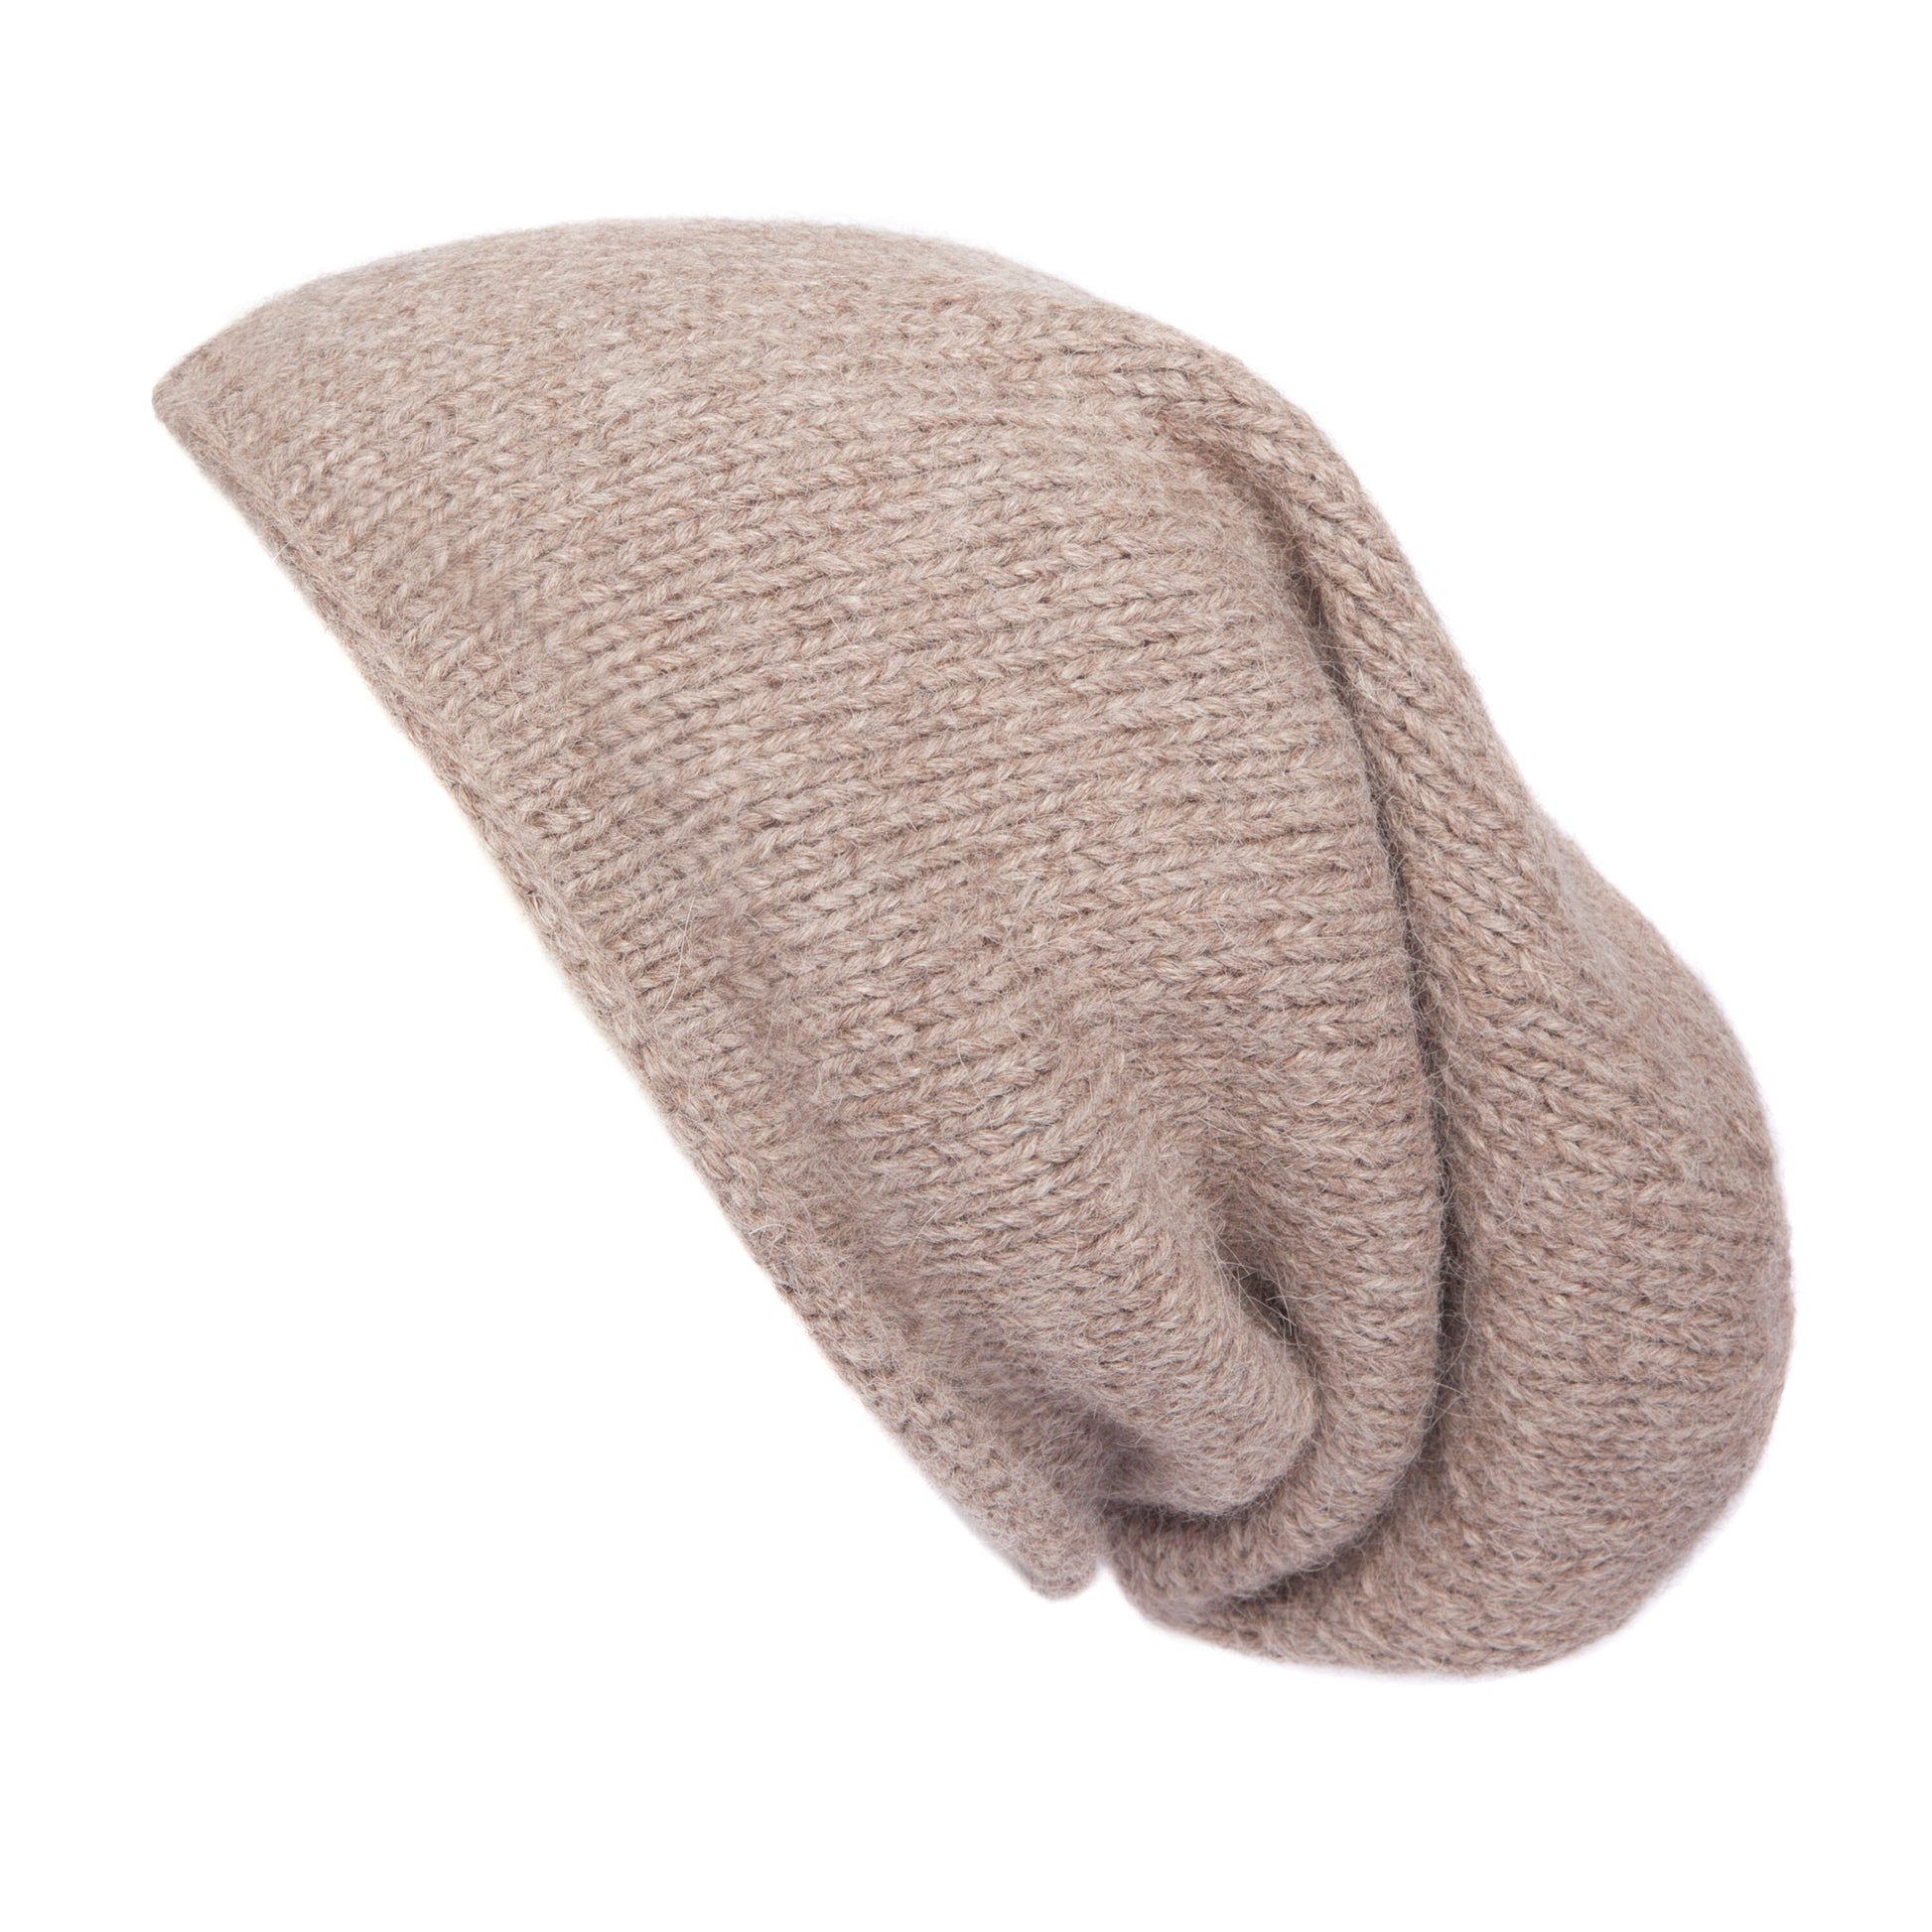 Extra long slouch hat